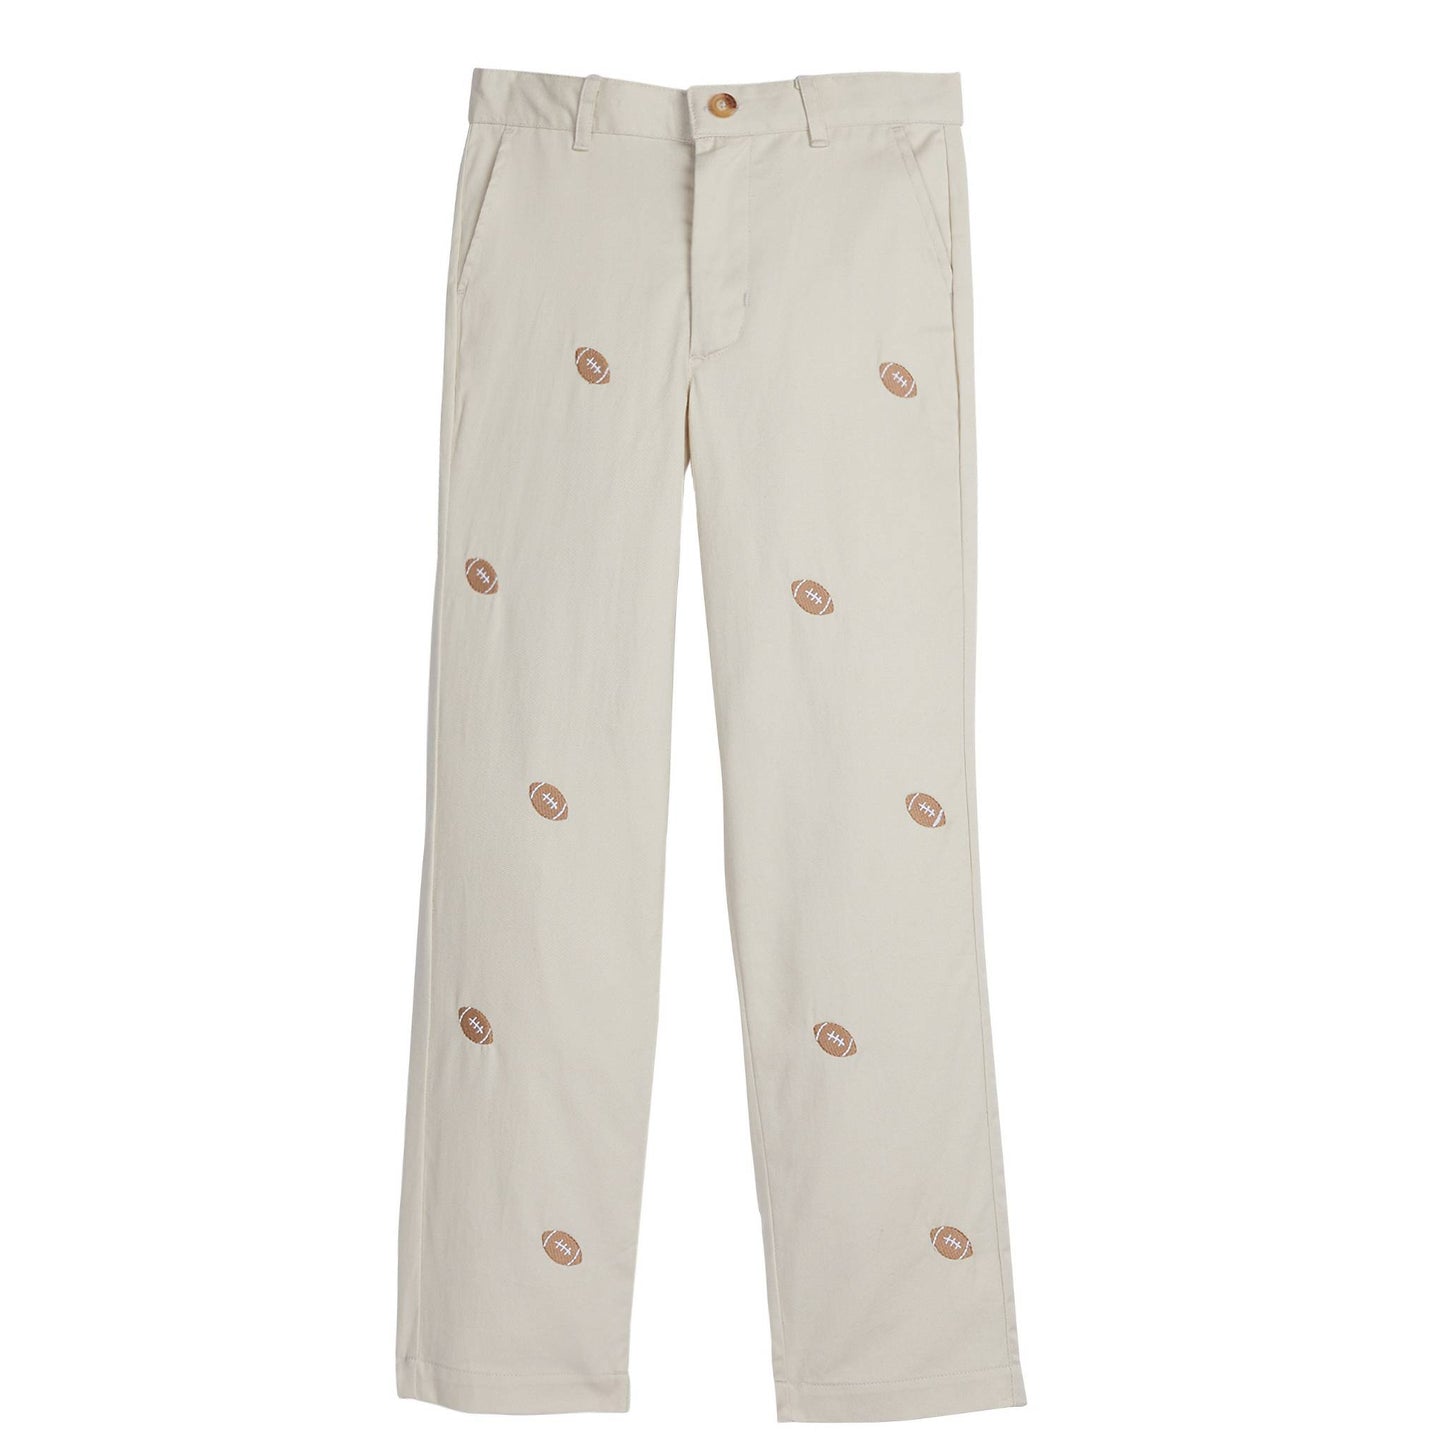 Classic Schiffly Pant - Football Embroidery